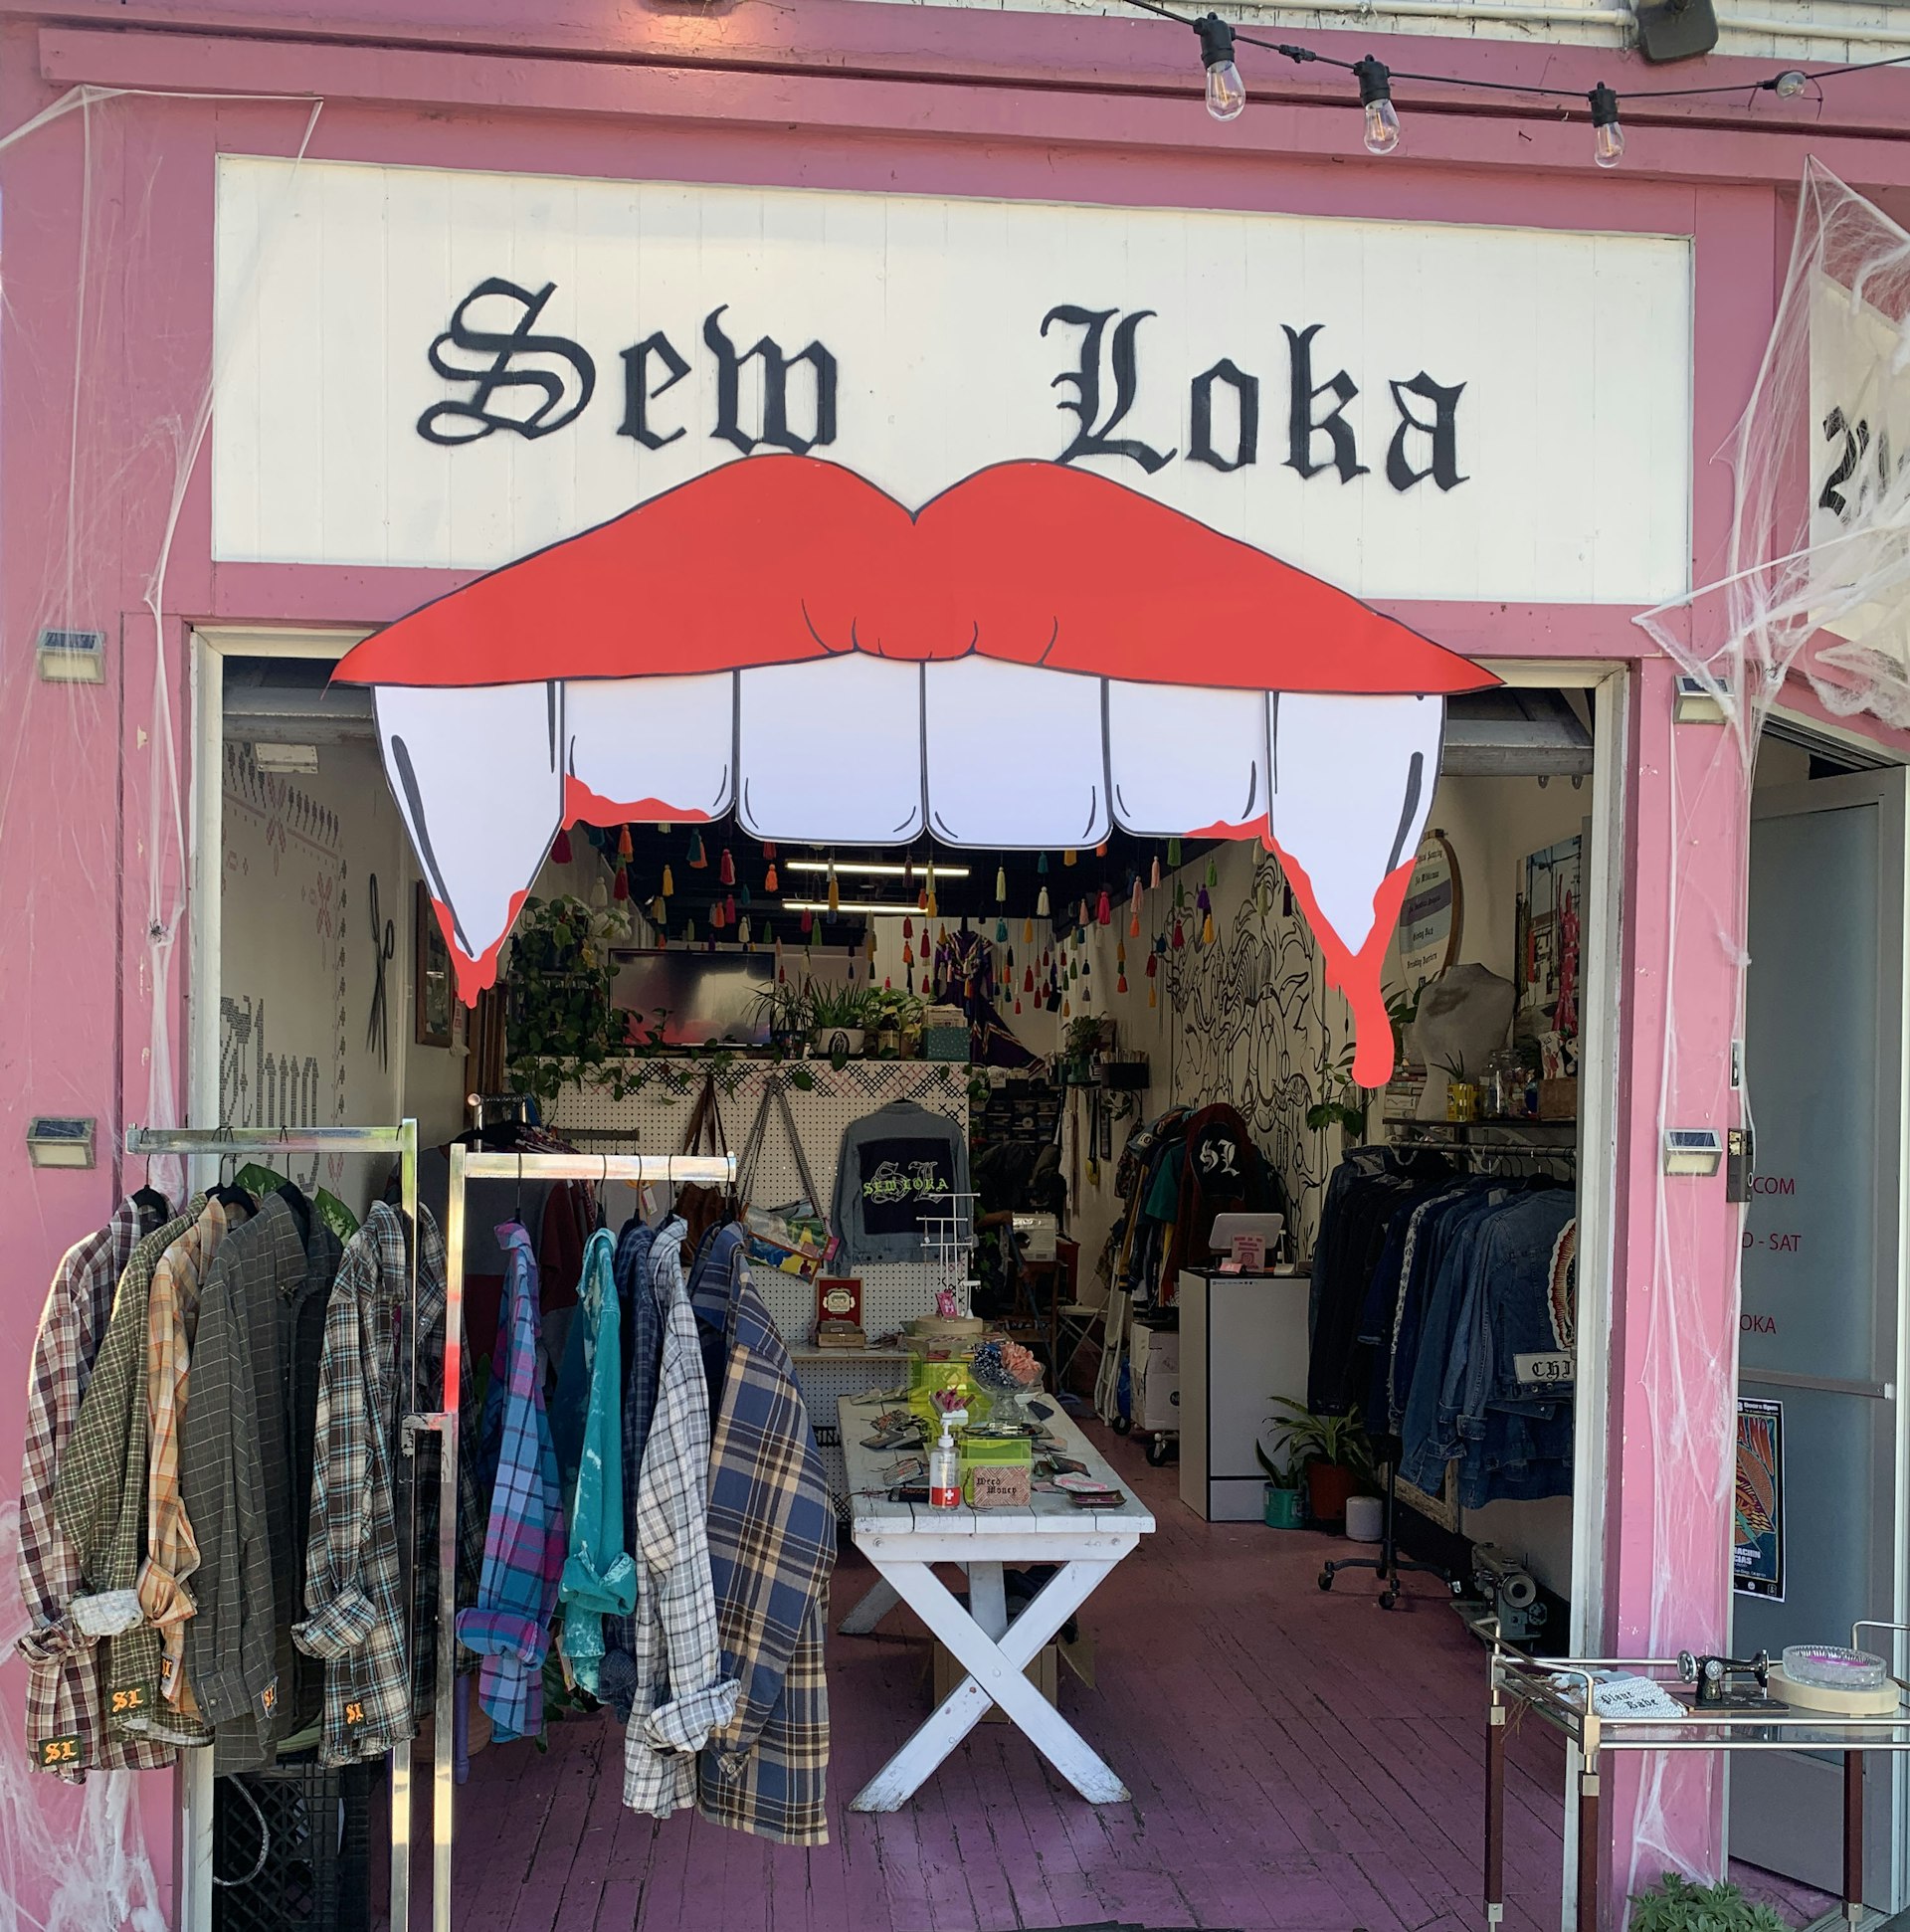 Exterior shot of the Sew Loka shop. There a sign in the shape of a pair of lips with fangs hanging from the store front. On the side you can see clothes rack with clothing and you can see inside the store.